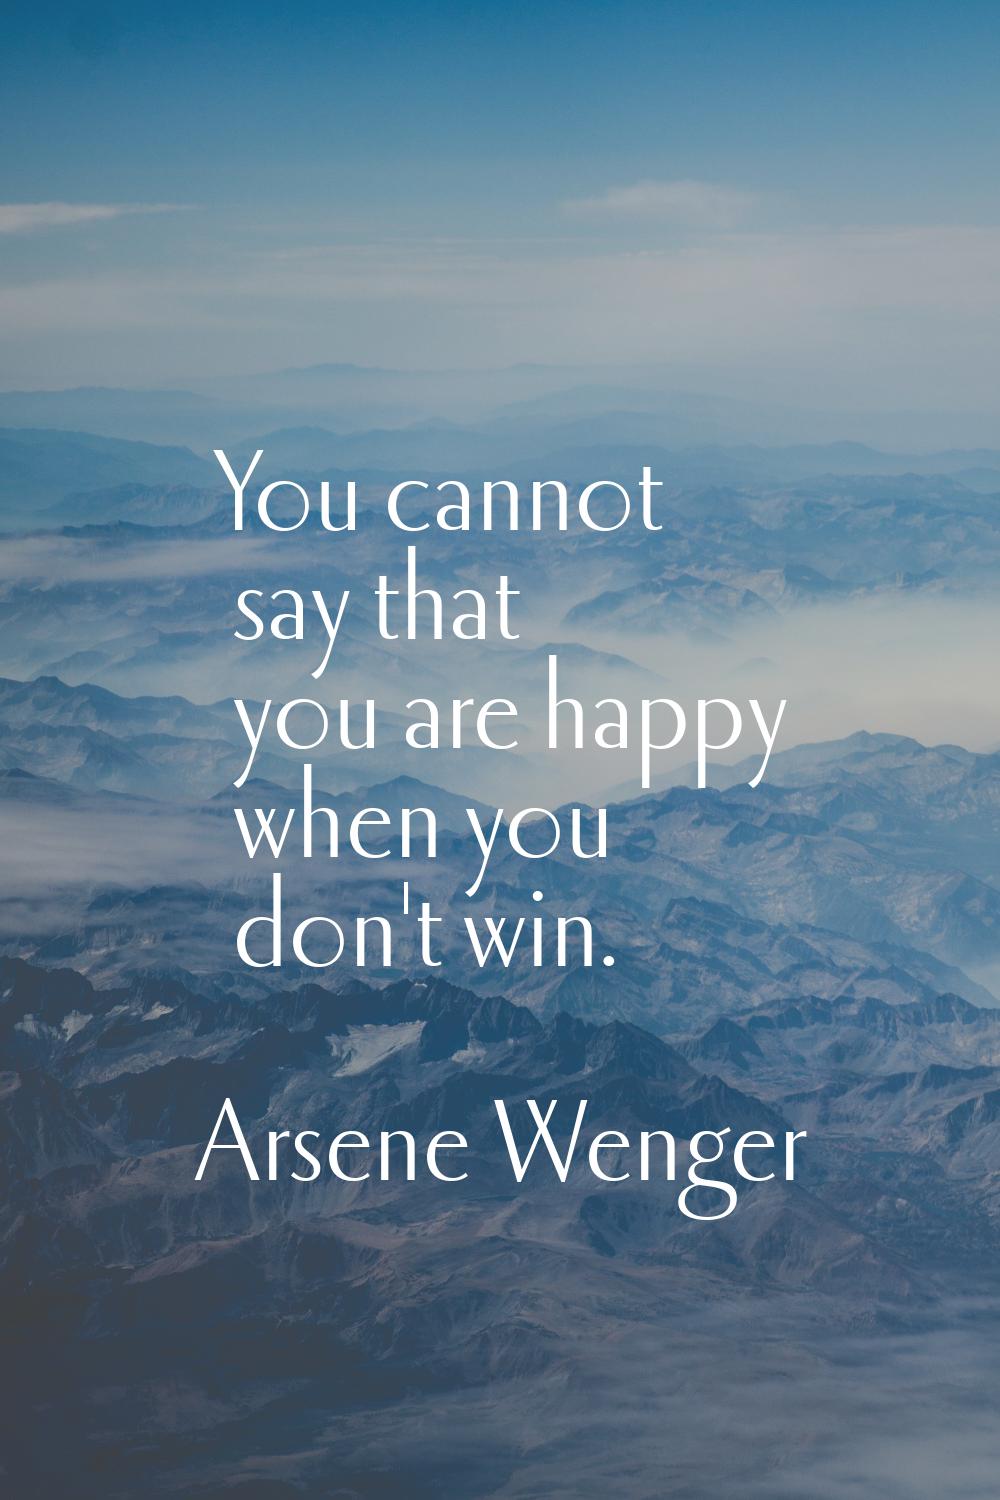 You cannot say that you are happy when you don't win.